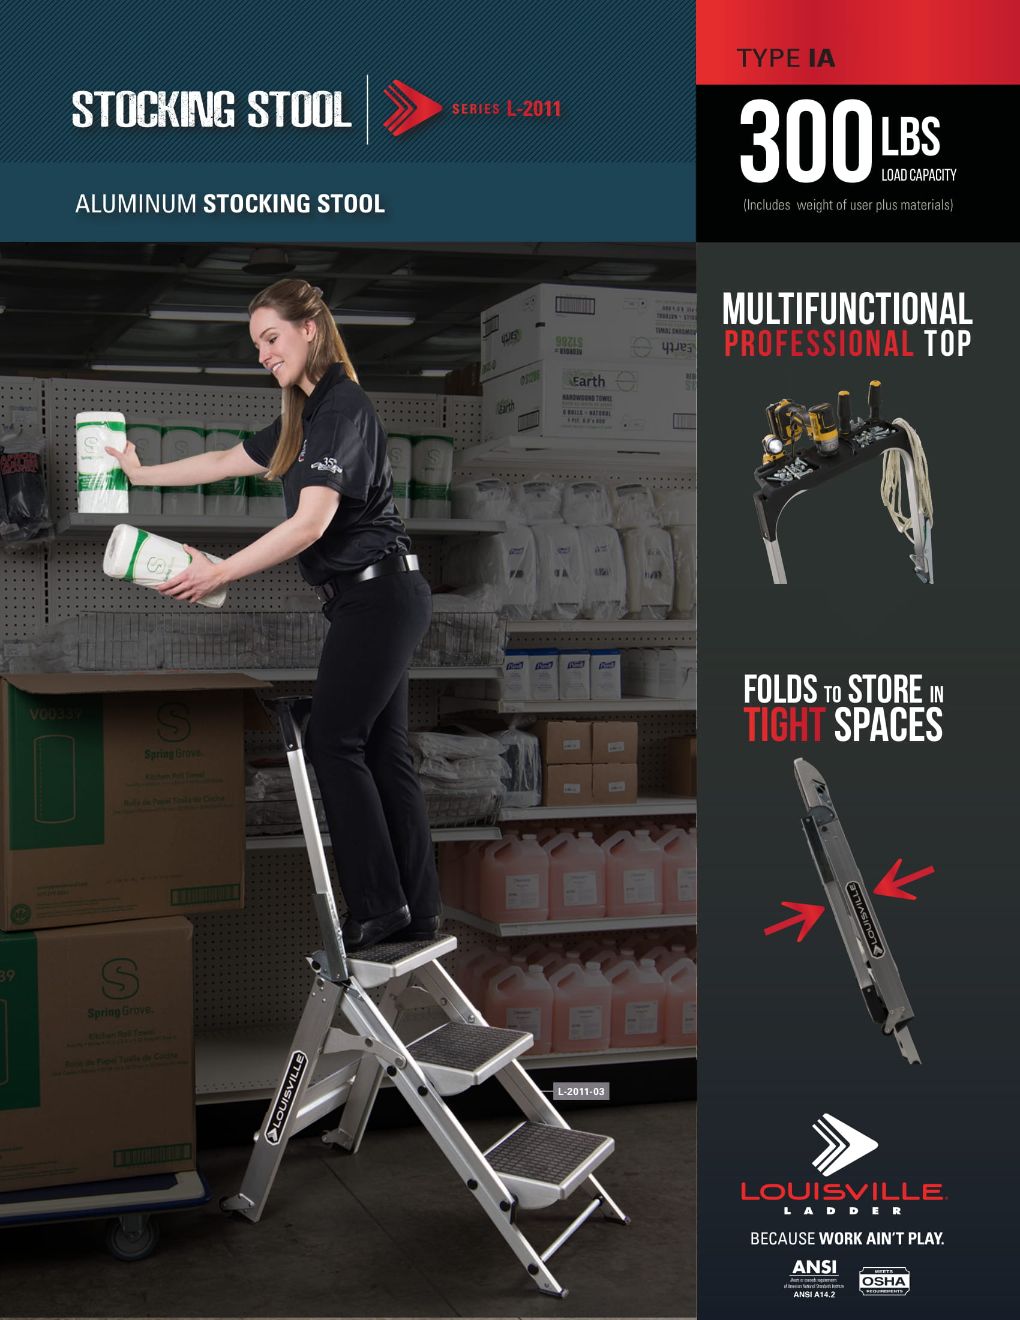 L-2011 Stocking Stool Flyer and Spec Sheet Marketing Material Image